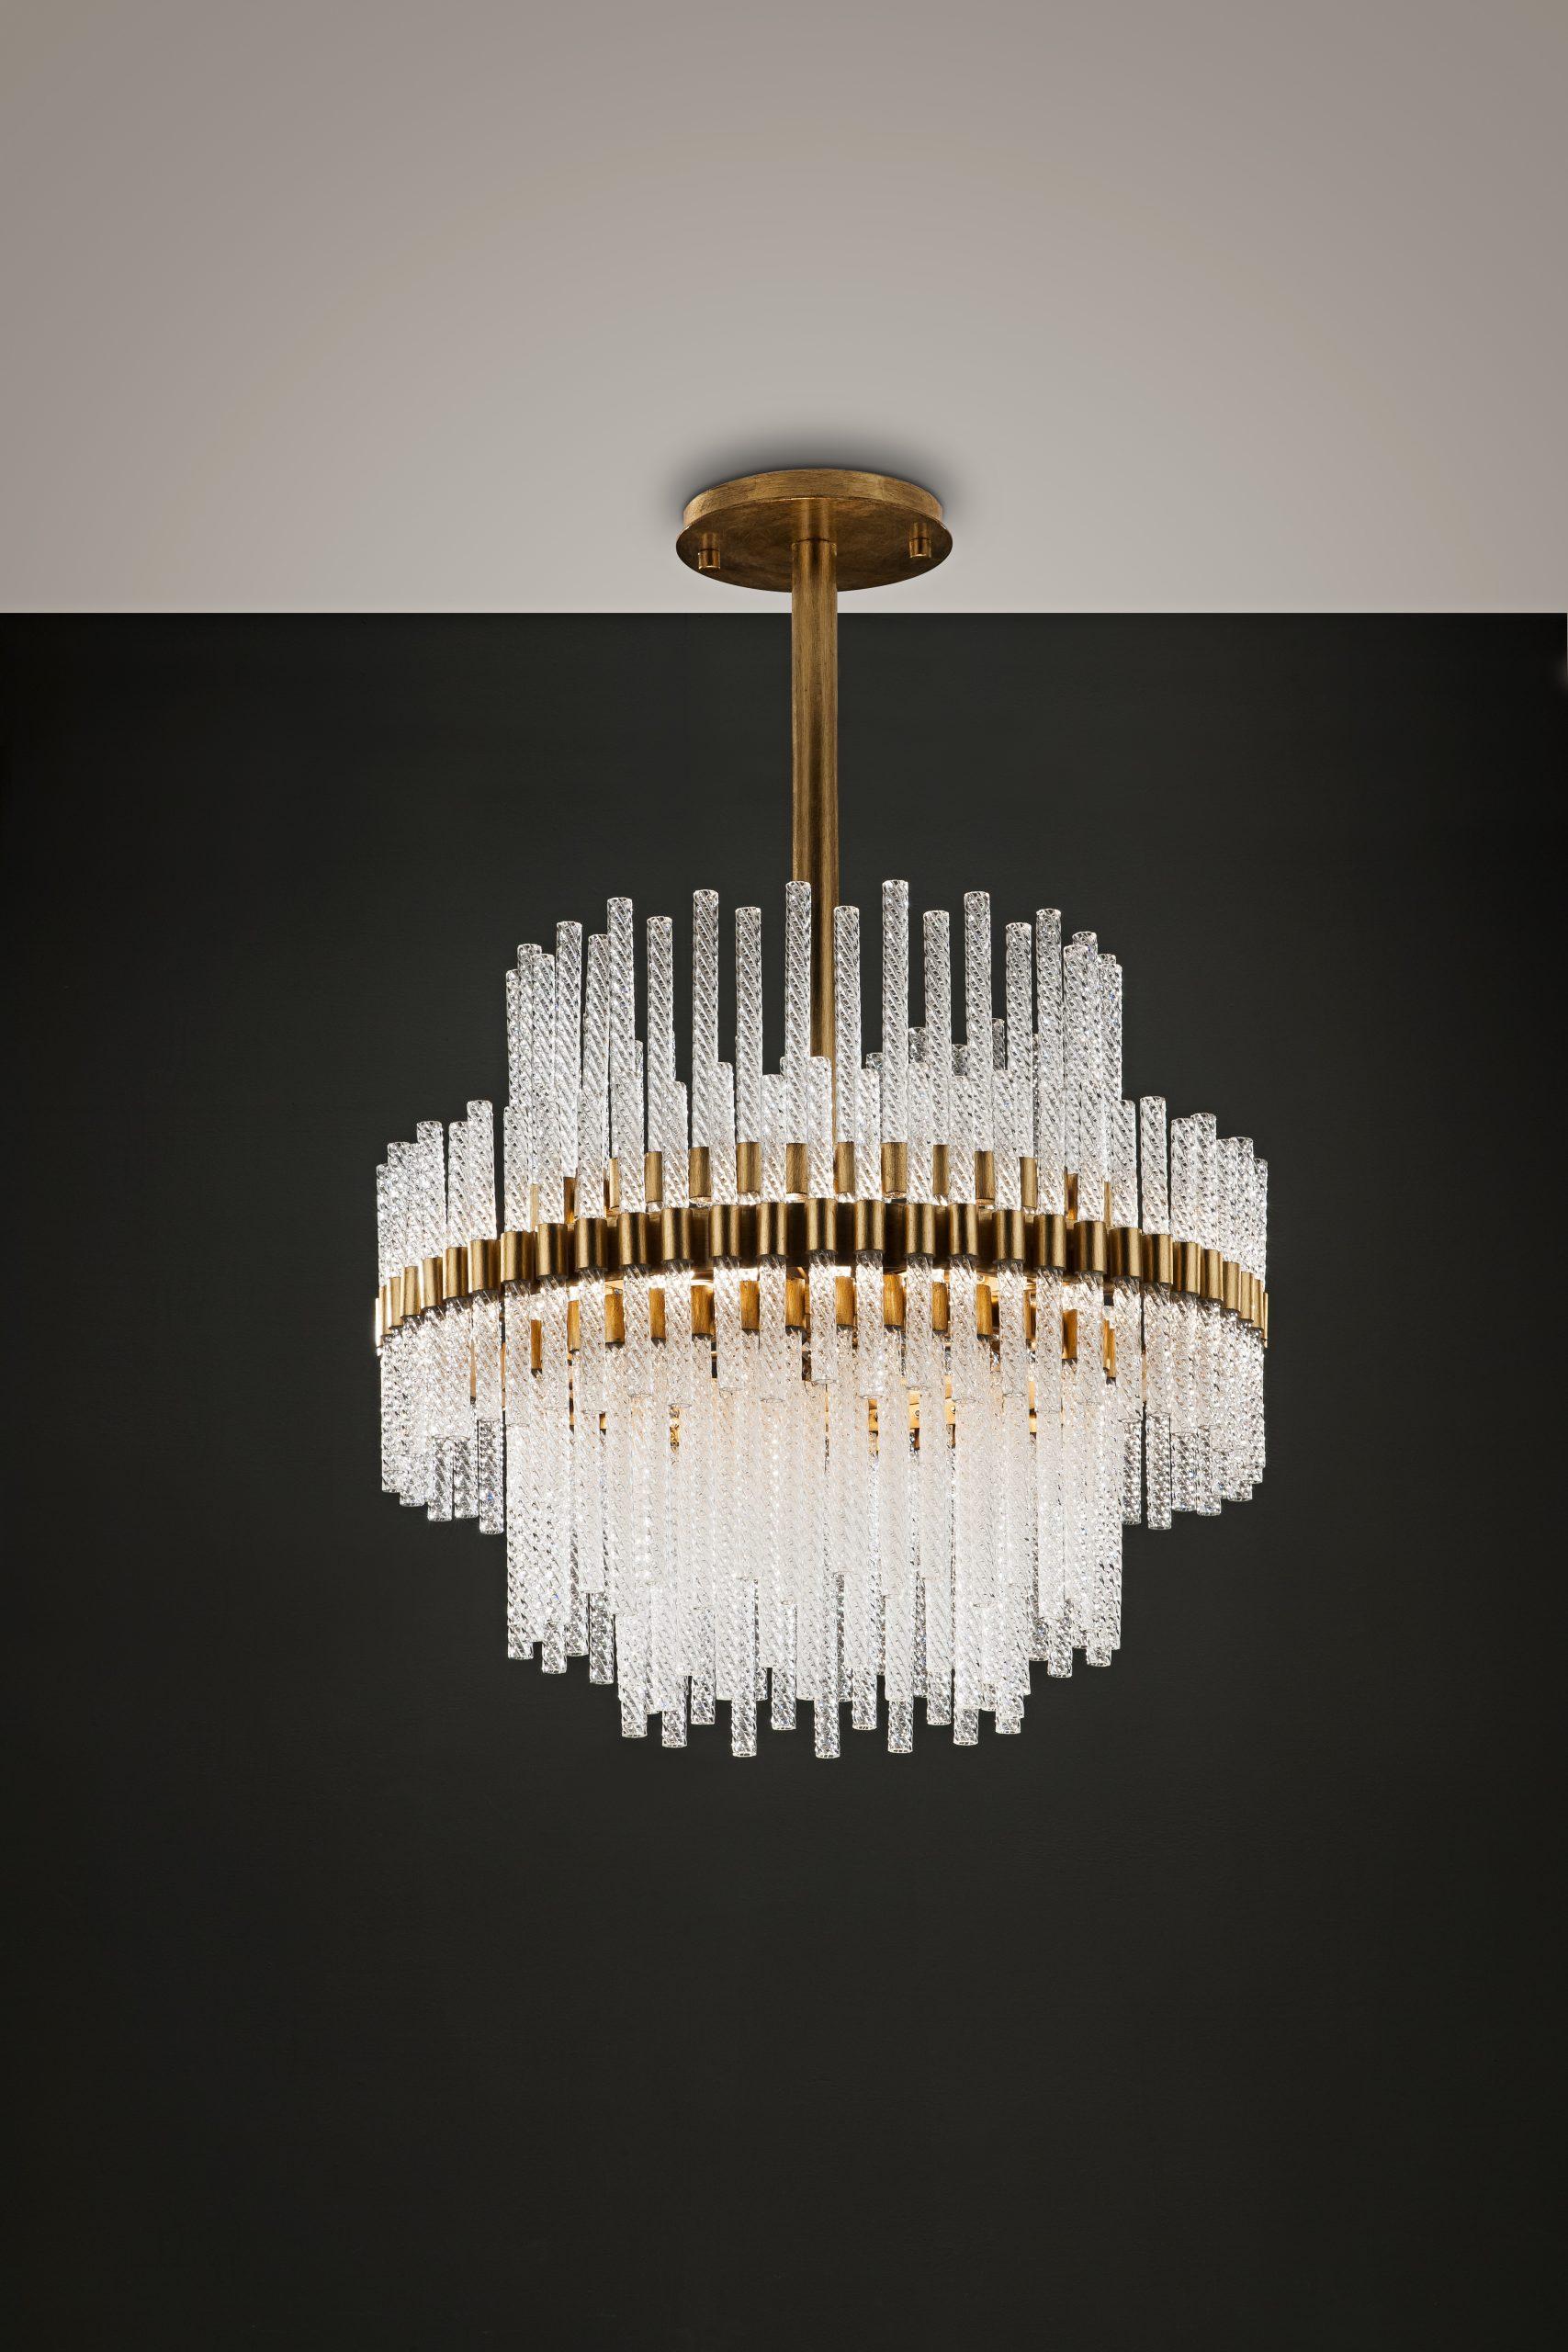 Glass Chandelier by Aver
Dimensions: D 72 x H 55 cm
Materials: Glass, metals.
Finishes: Gold Leaf, Silver Leaf, Warm Gold Leaf, Warm Silver Leaf, Warm Copper Leaf, Dark Gold Leaf, Dark Silver Leaf, Bronze Leaf, Antique Bronze, Antique